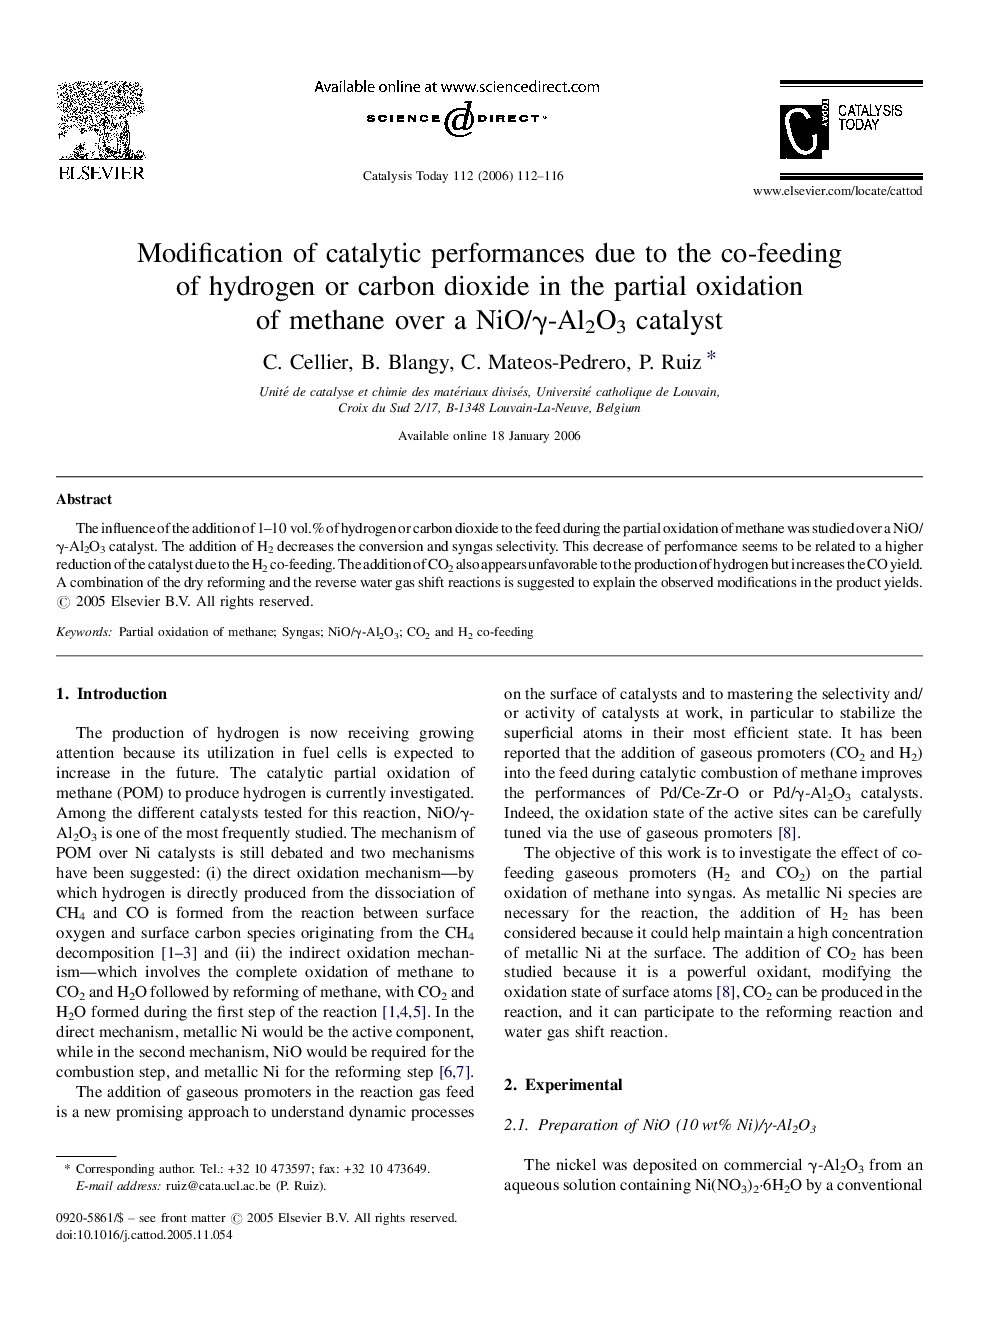 Modification of catalytic performances due to the co-feeding of hydrogen or carbon dioxide in the partial oxidation of methane over a NiO/γ-Al2O3 catalyst